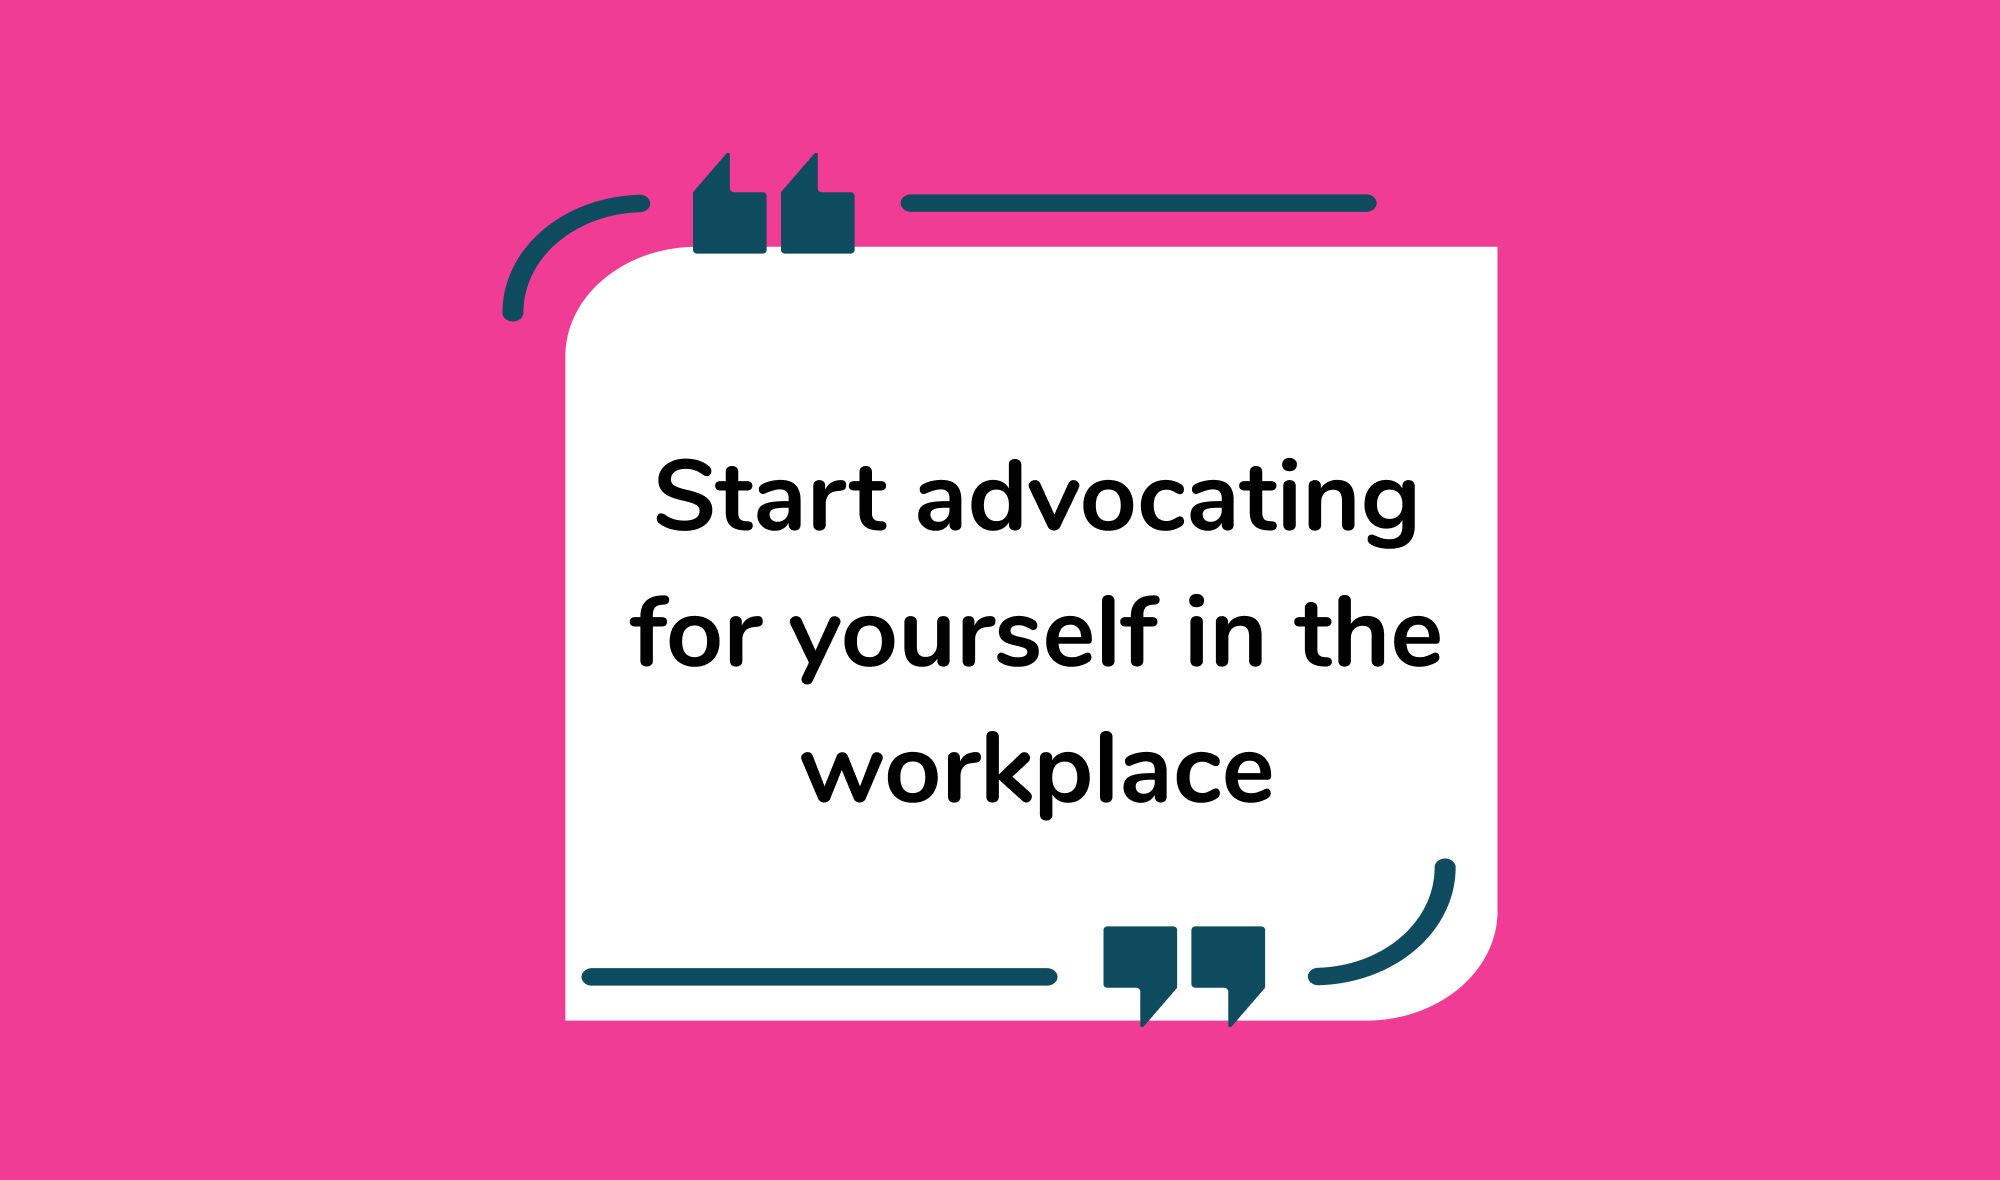 Start advocating for yourself in the workplace with this 5 step process